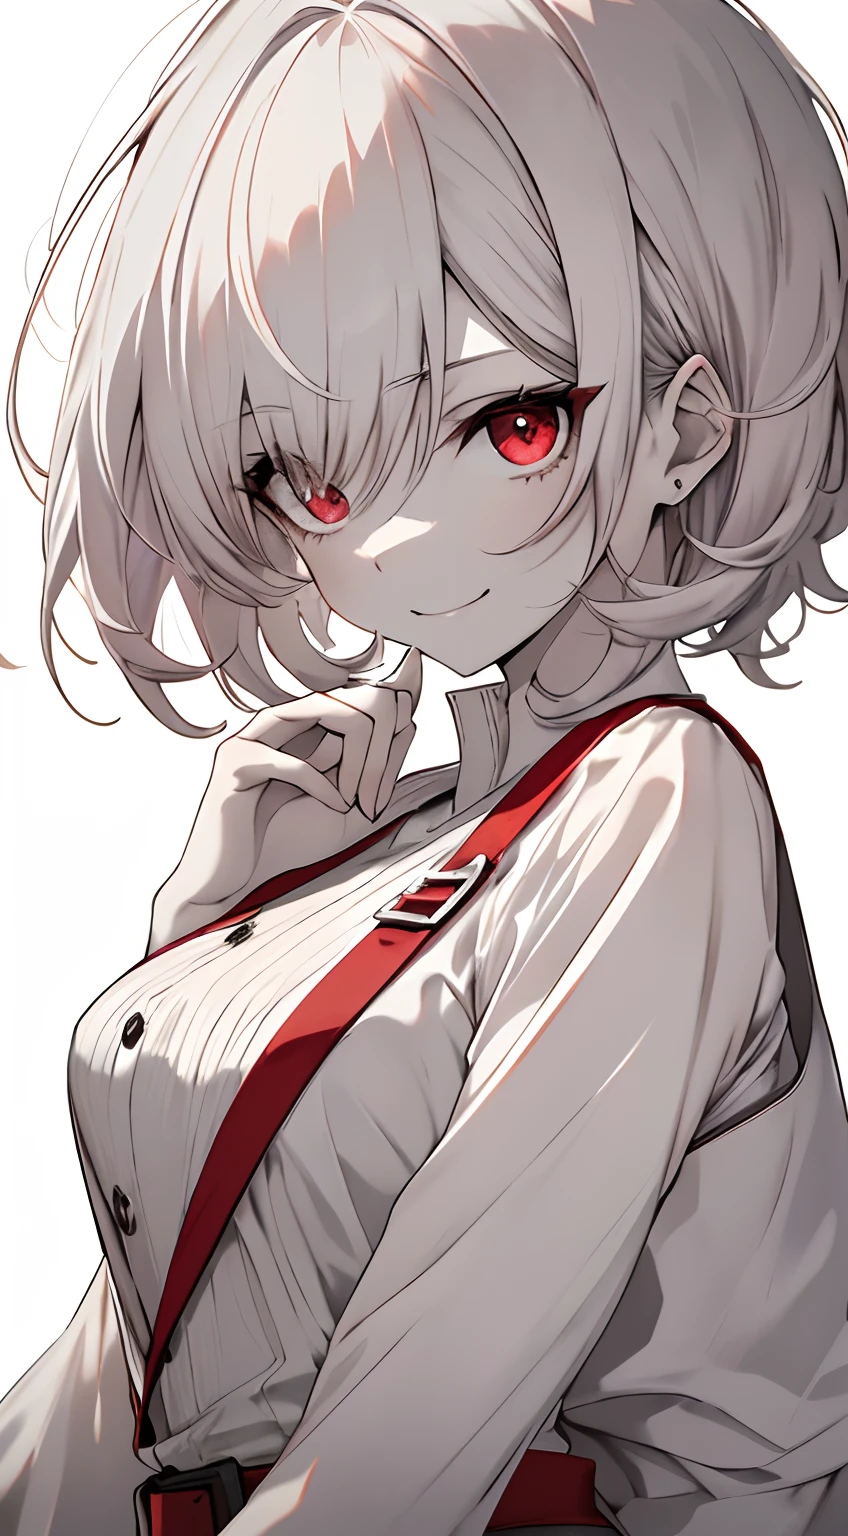 Full body, White one-piece uniform,(masutepiece:1.2, Best Quality), (finely detailed beautiful eye: 1.2), (beautifull detailed face), High contrast, (Best Illumination, extremely delicate and beautiful), ((Cinematic Light)), Dramatic light, Intricate details,red eyes, large full breasts, Belt under the chest, White sailor suit, White skirt,pale peach-colored hair, (Pale white background:1.5), Short-cut hair, accurate hands, Look at me and smile, ruddy skin, hi-school girl,